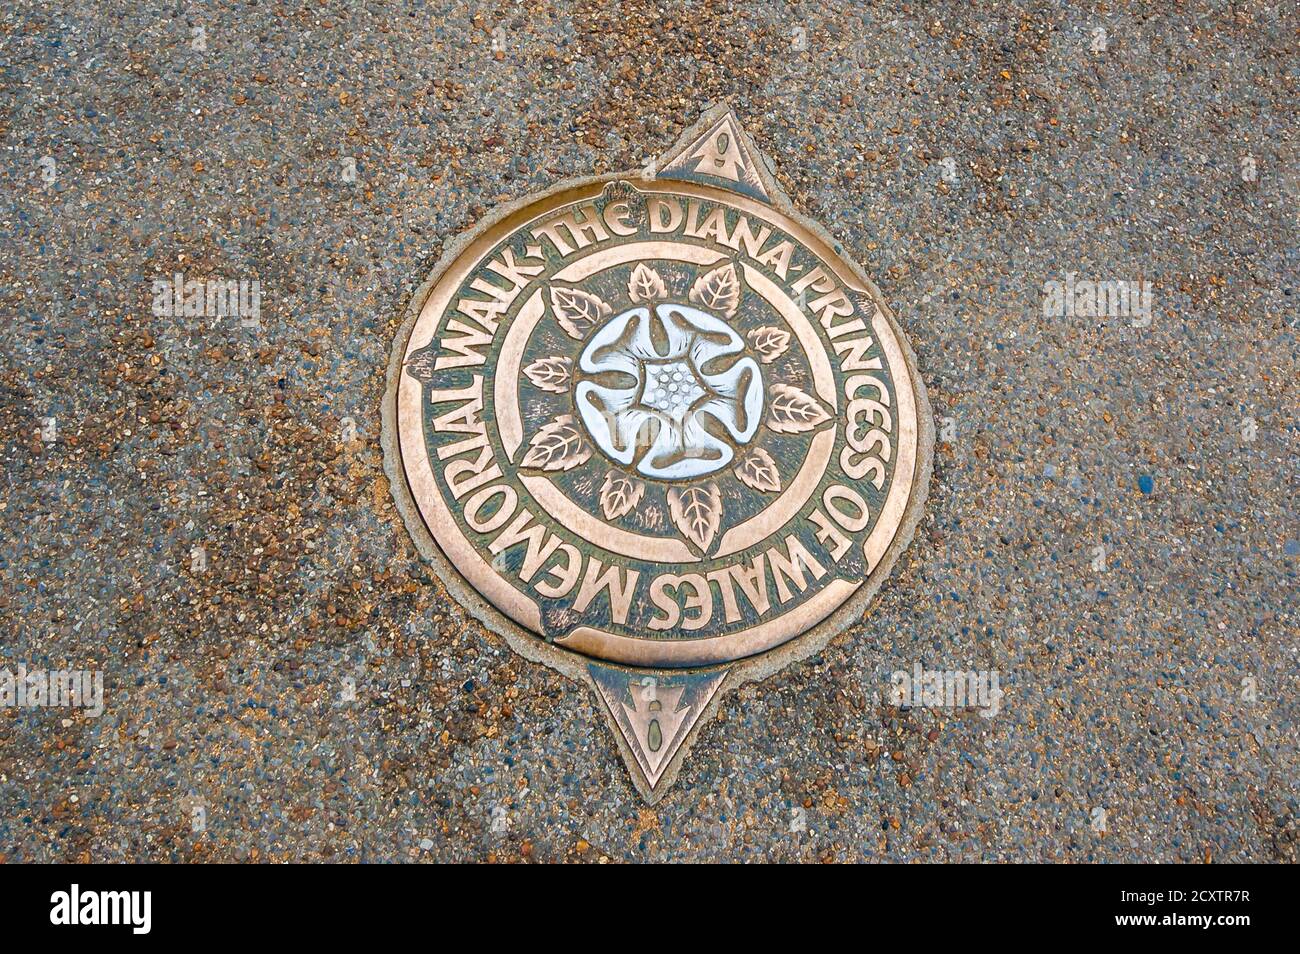 London, United Kingdom - September 14, 2017: Golden plate on the ground dedicated to the Diana princess of Wales memorial walk Stock Photo